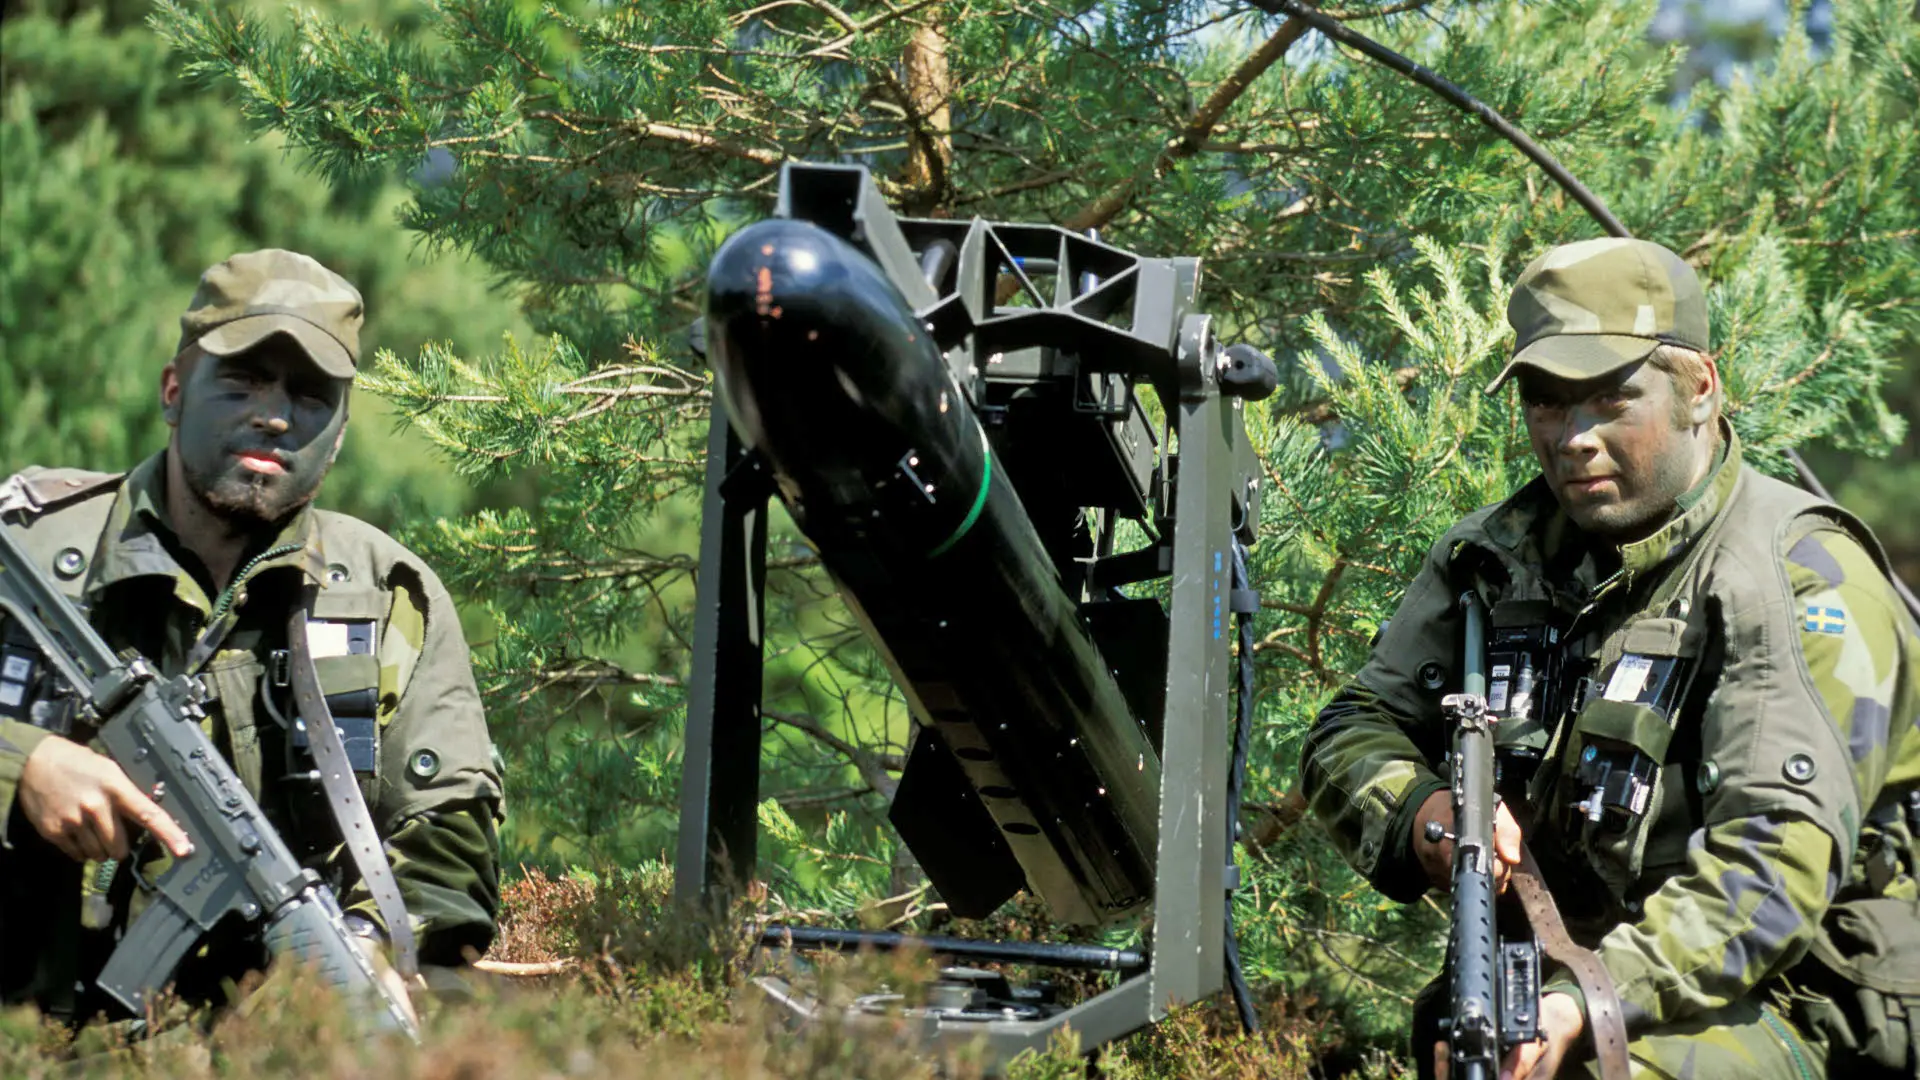 RBS 17 (naval target robot 17) is the Swedish version of the AGM-114C Hellfire air-to-ground missile, Defense Express